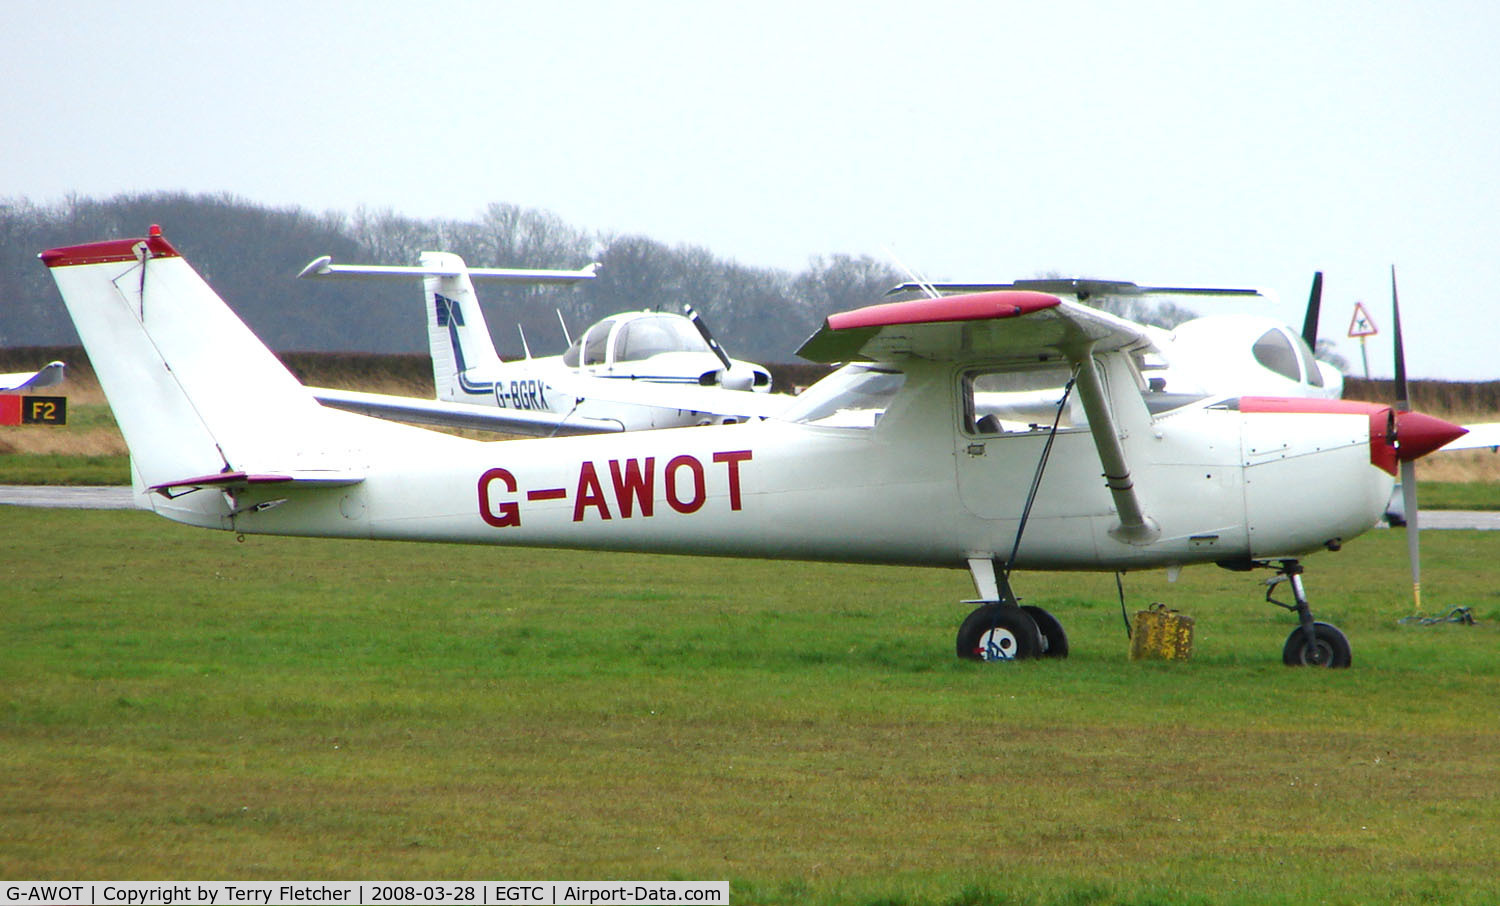 G-AWOT, 1968 Reims F150H C/N 0389, Part of the General Aviation activity at Cranfield